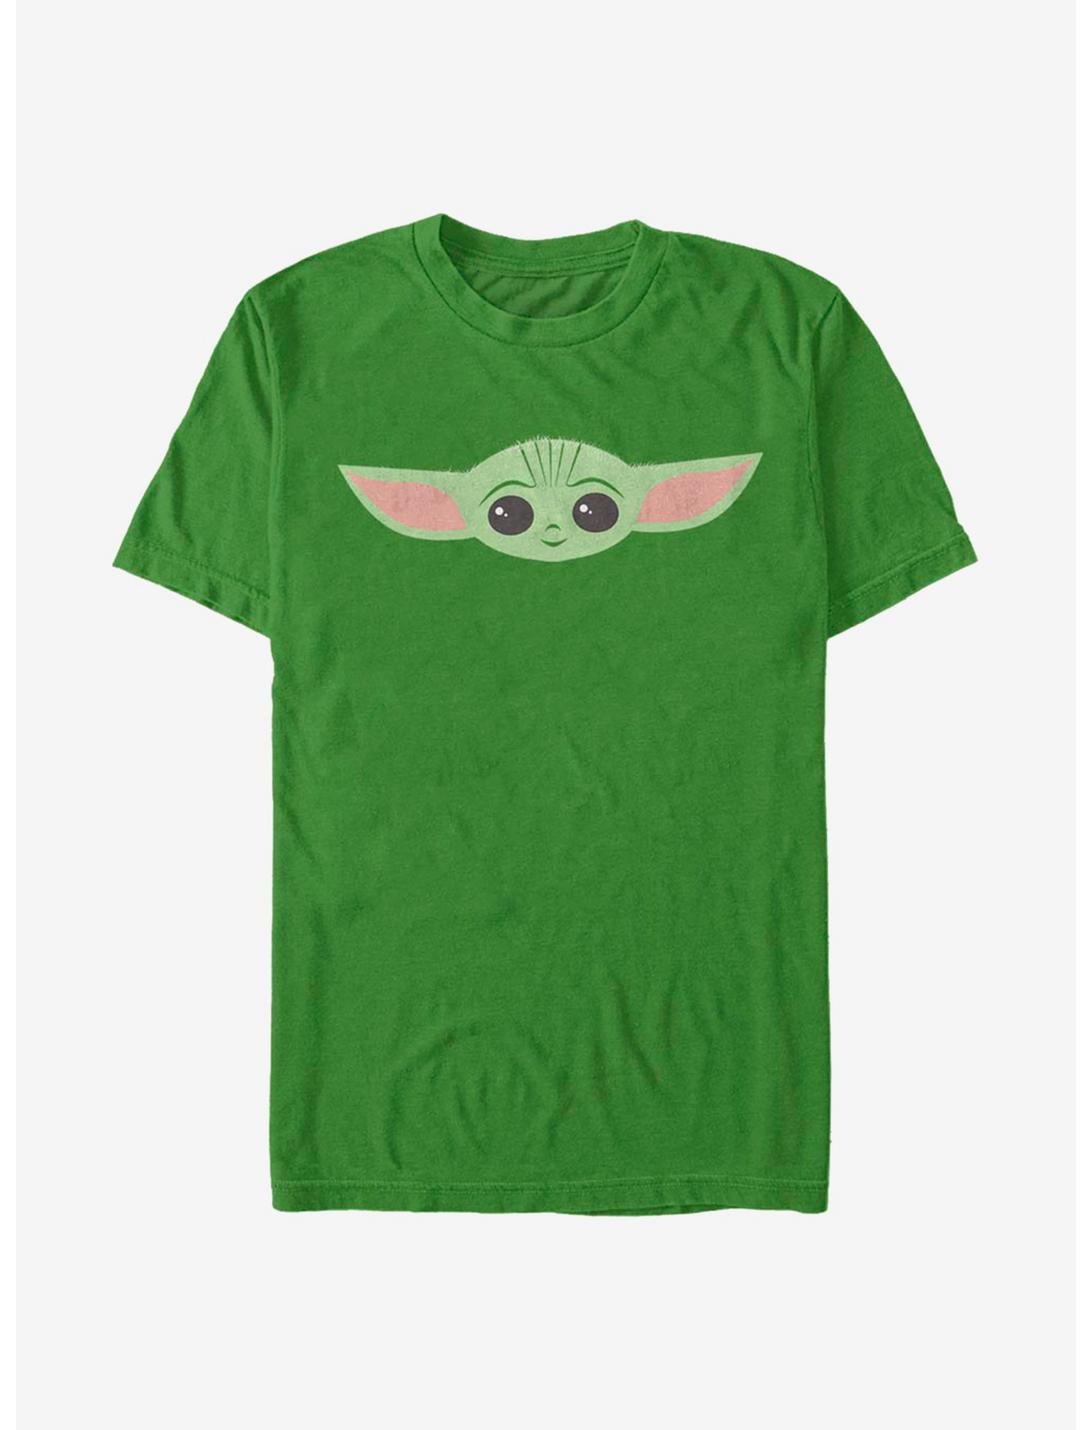 Extra Soft Star Wars The Mandalorian Cute Face The Child T-Shirt, KELLY, hi-res